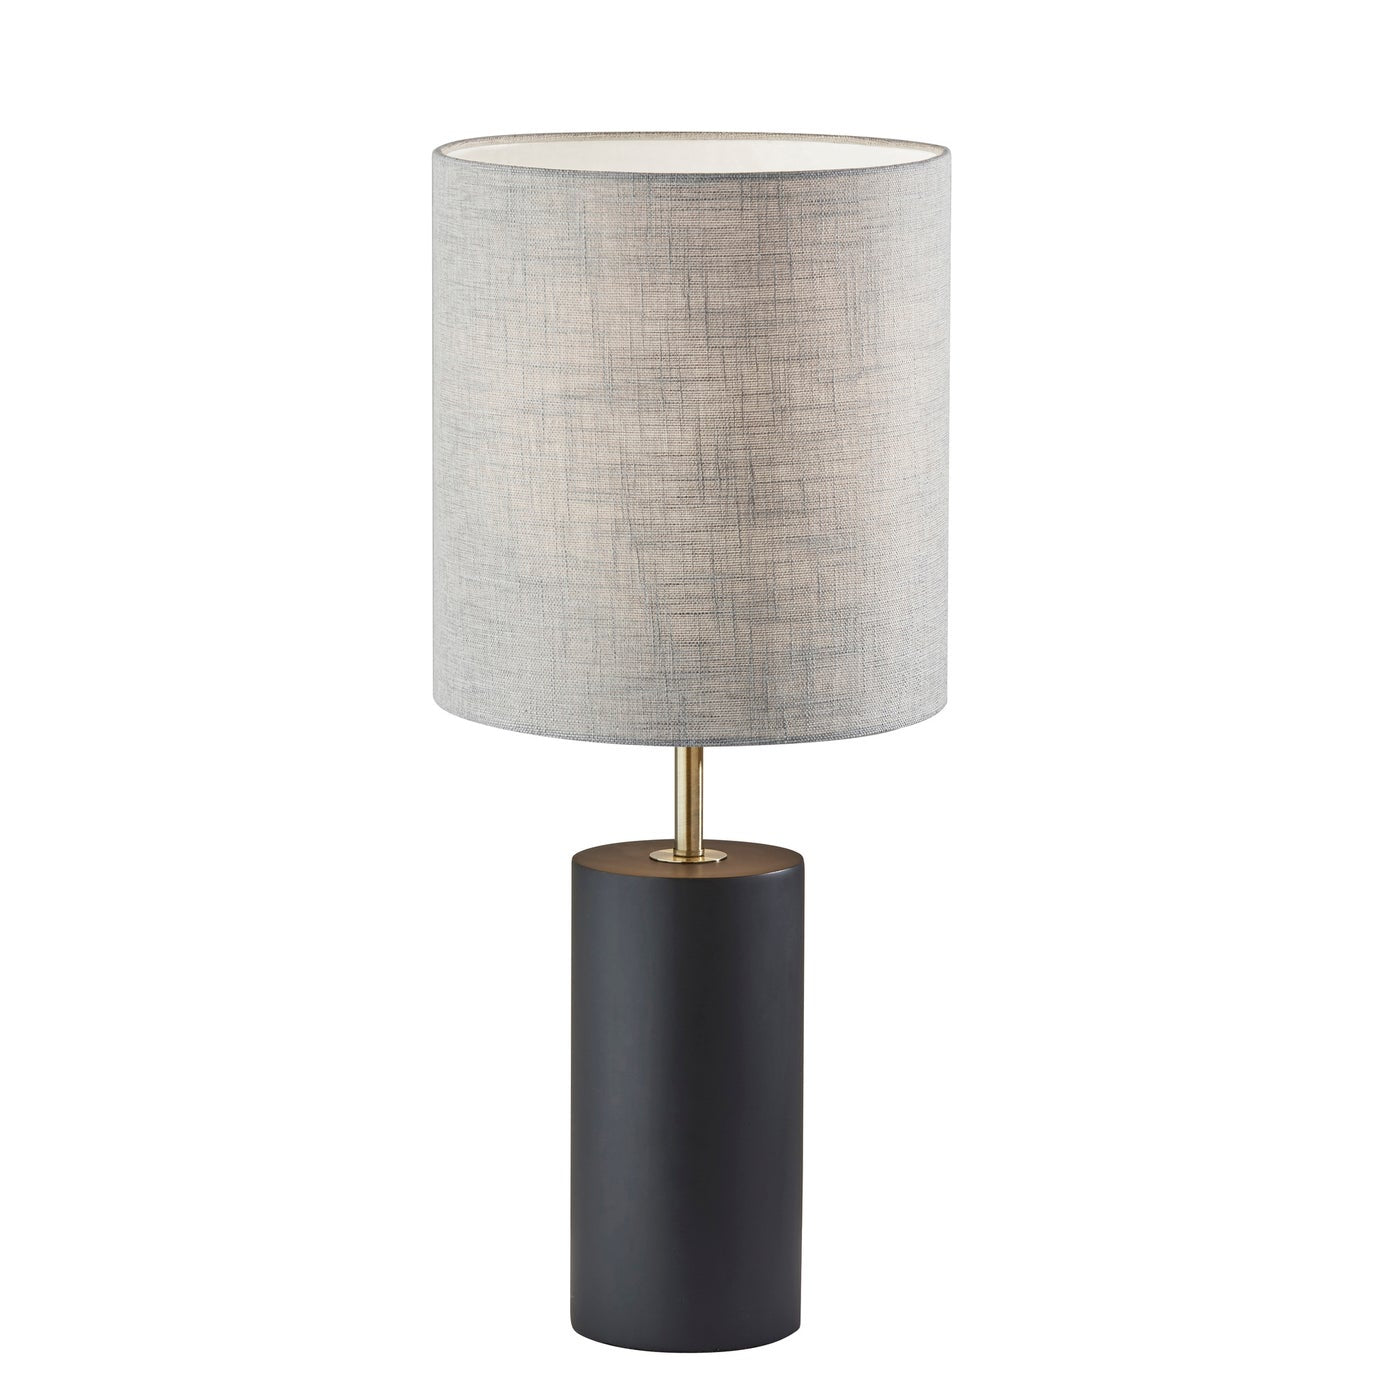 Adesso Home - 1507-01 - Table Lamp - Dean - Black Poplar Wood W. Antique Brass Accent